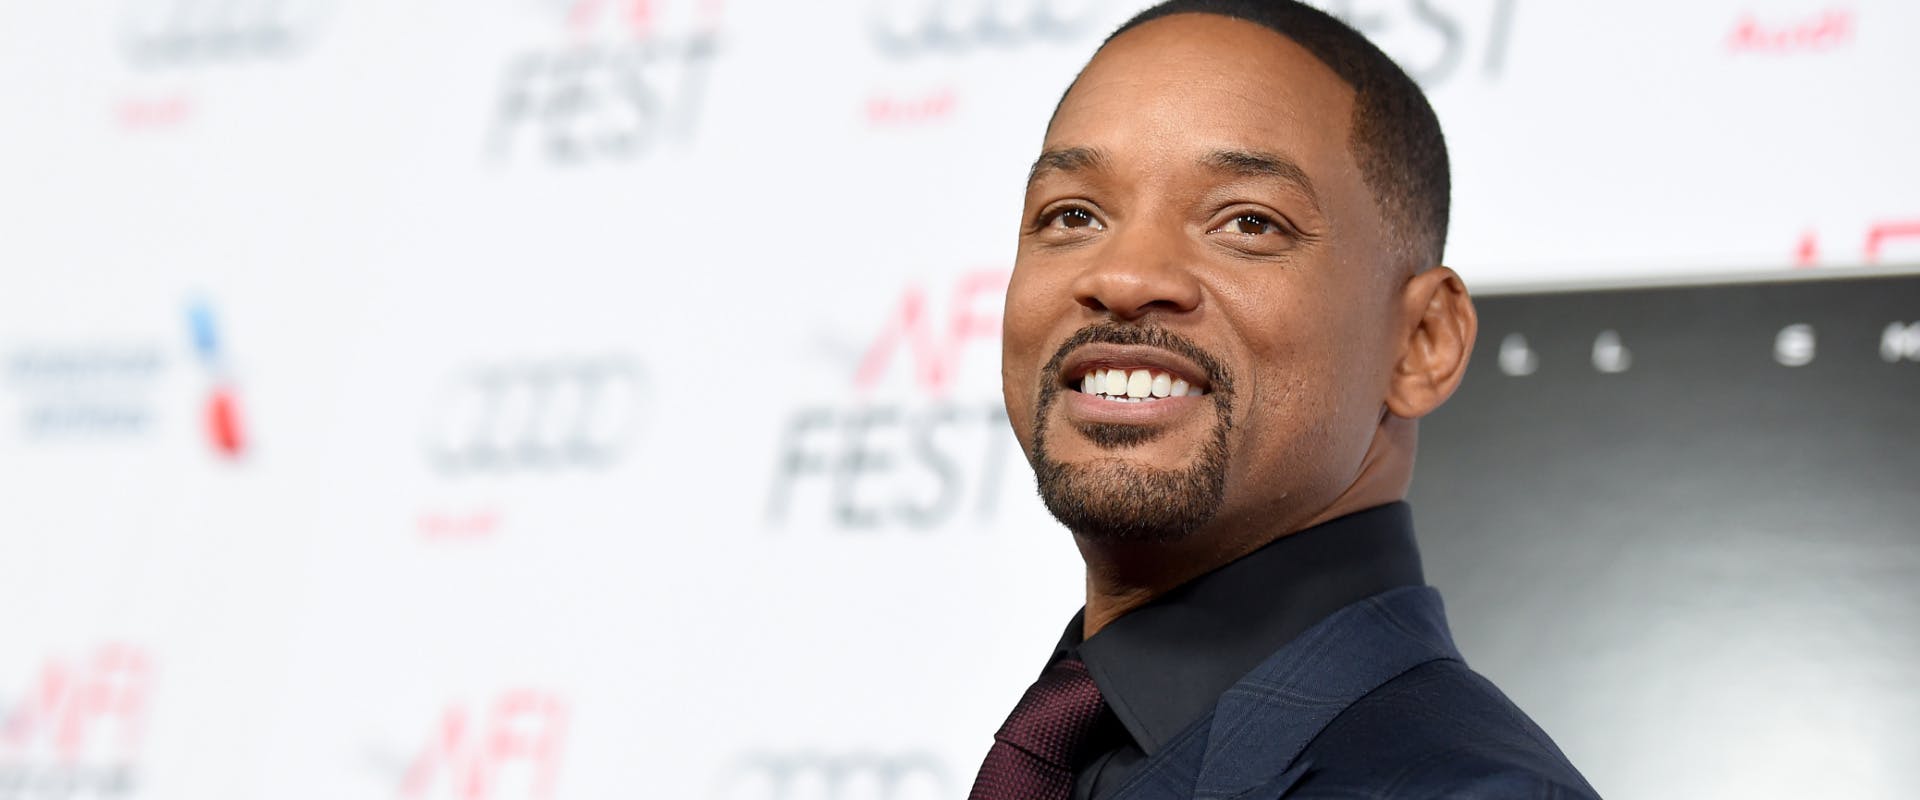 HOLLYWOOD, CA - NOVEMBER 10: Actor Will Smith attends the Centerpiece Gala Premiere of Columbia Pictures' "Concussion" during AFI FEST 2015 presented by Audi at TCL Chinese Theatre on November 10, 2015 in Hollywood, California. (Photo by Kevin Winter/Getty Images for AFI)